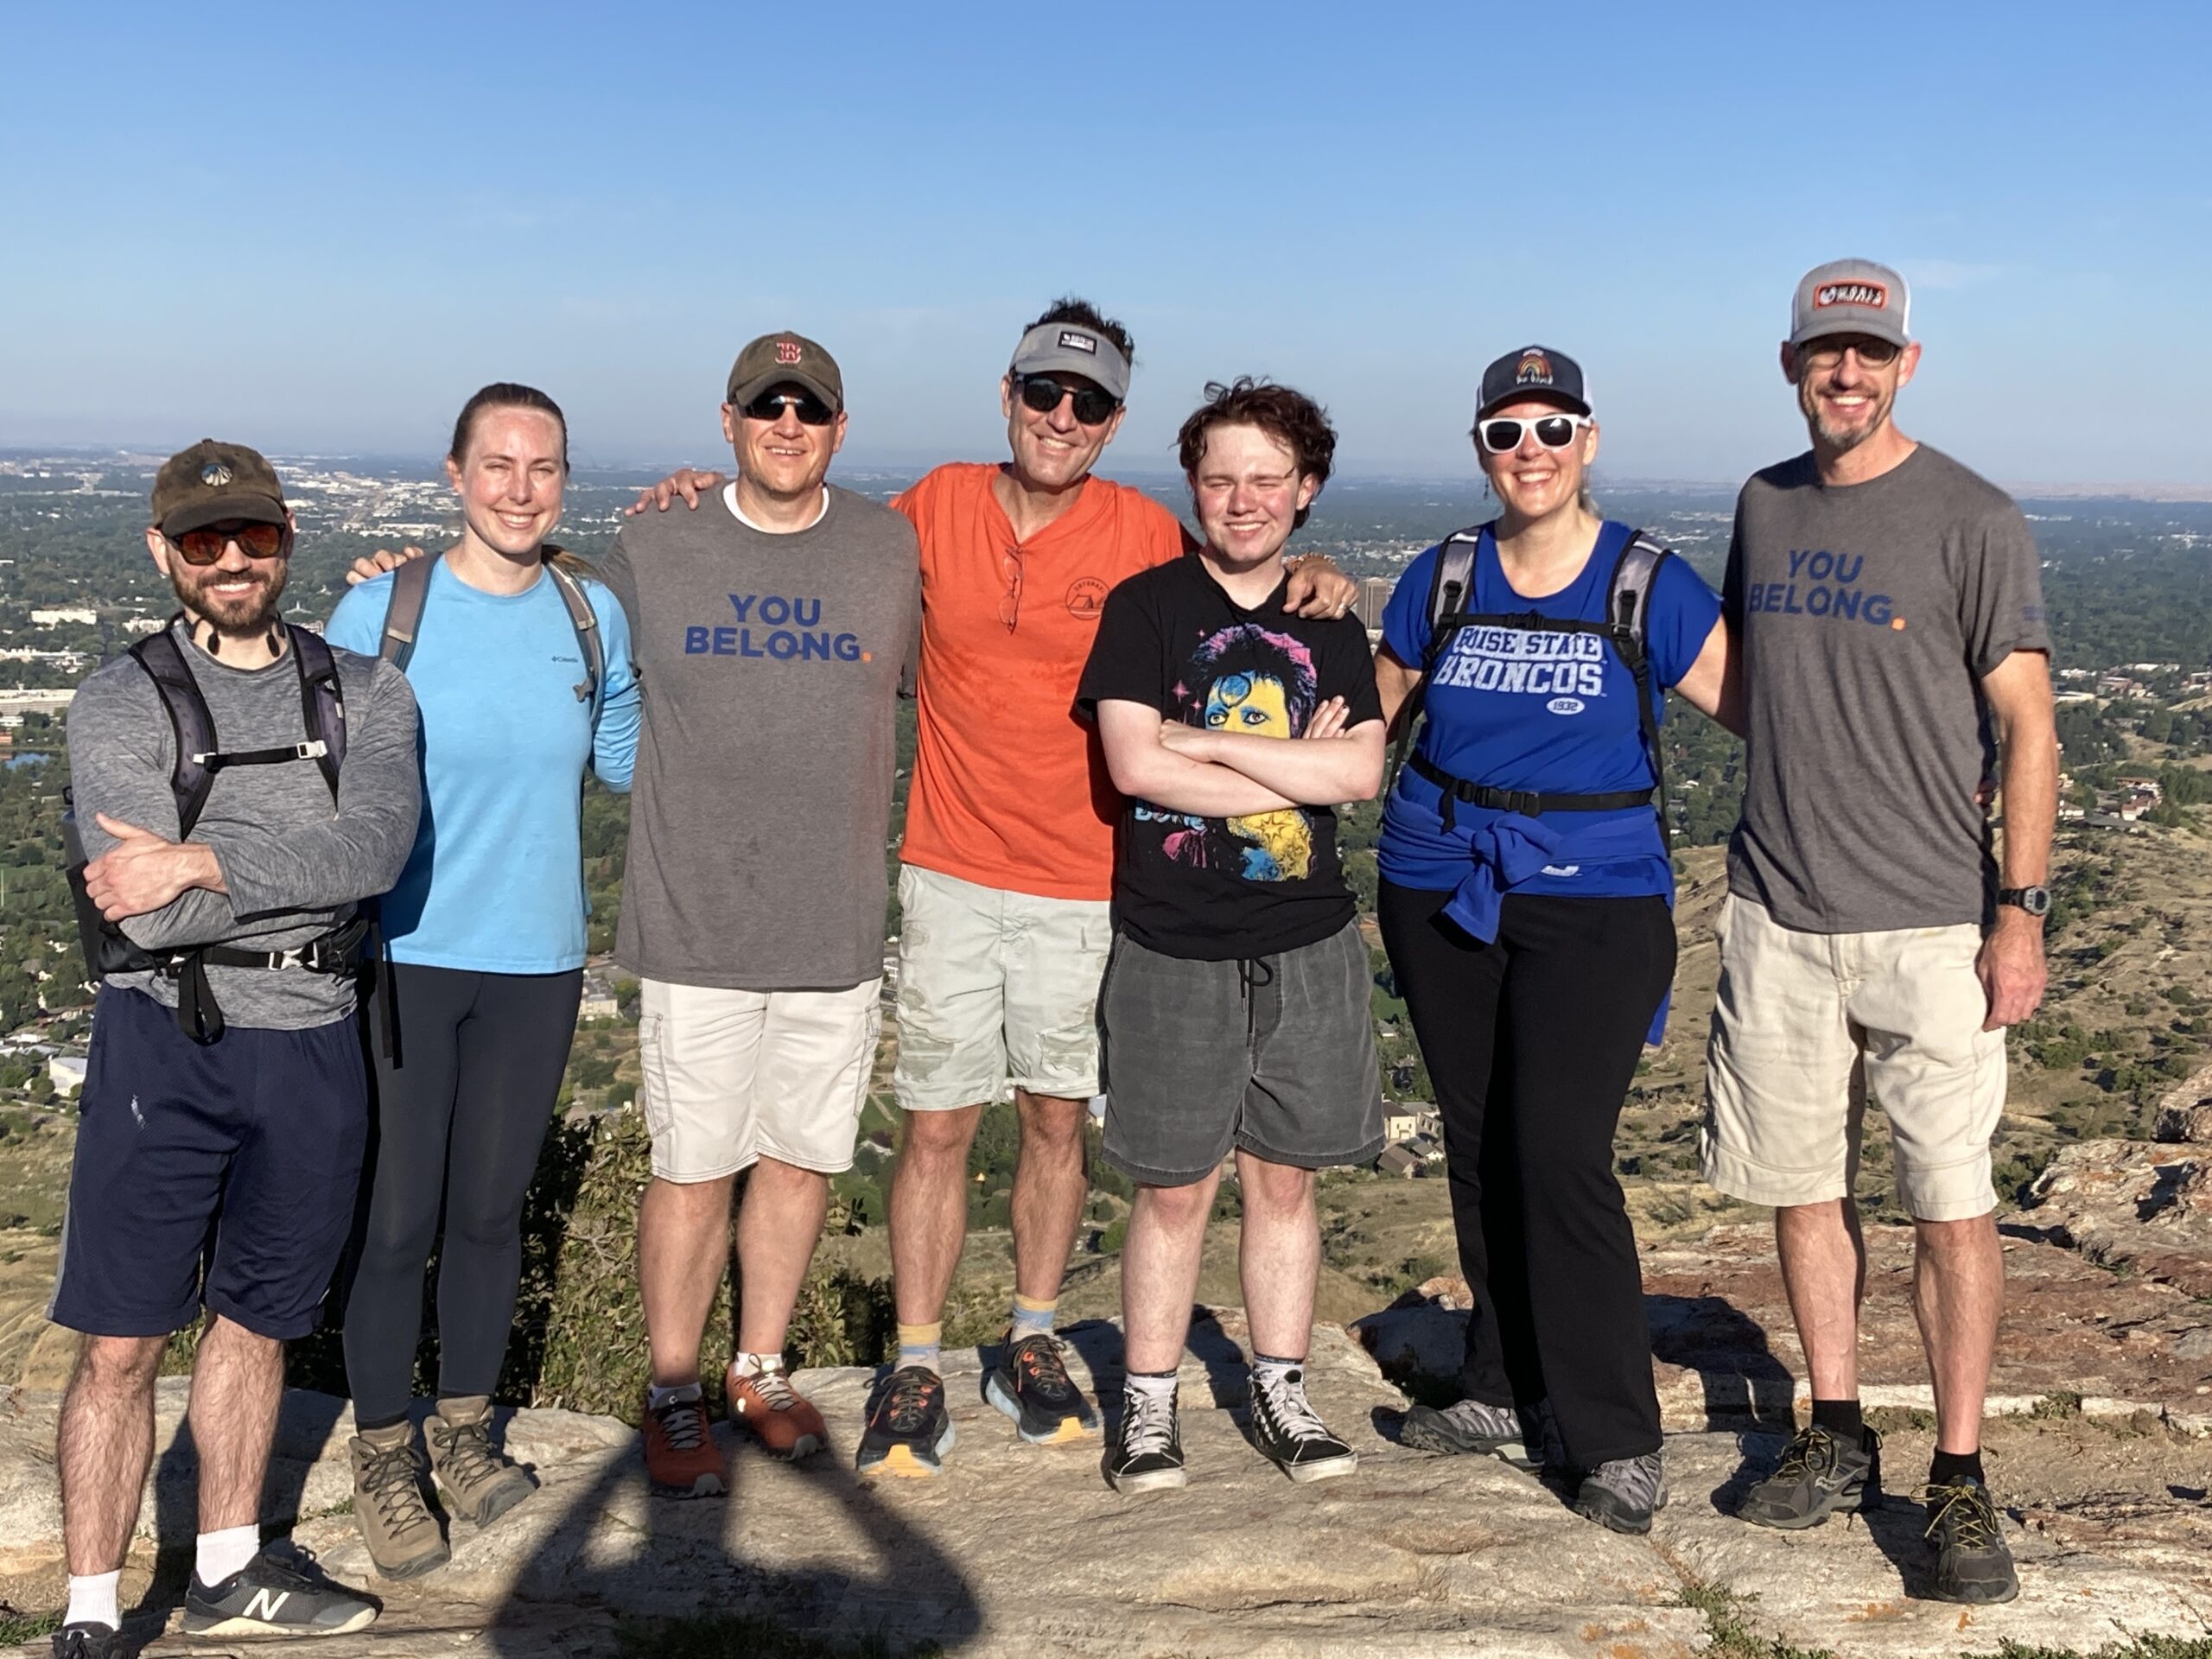 Living Learning Community Faculty after a hike. Kristin Olsen, faculty-in-residence for BroncoFit Living Learning Community, and Travis Armstrong, faculty-out-of-residence for the Health Professions Living Learning Community, stand on the far right.